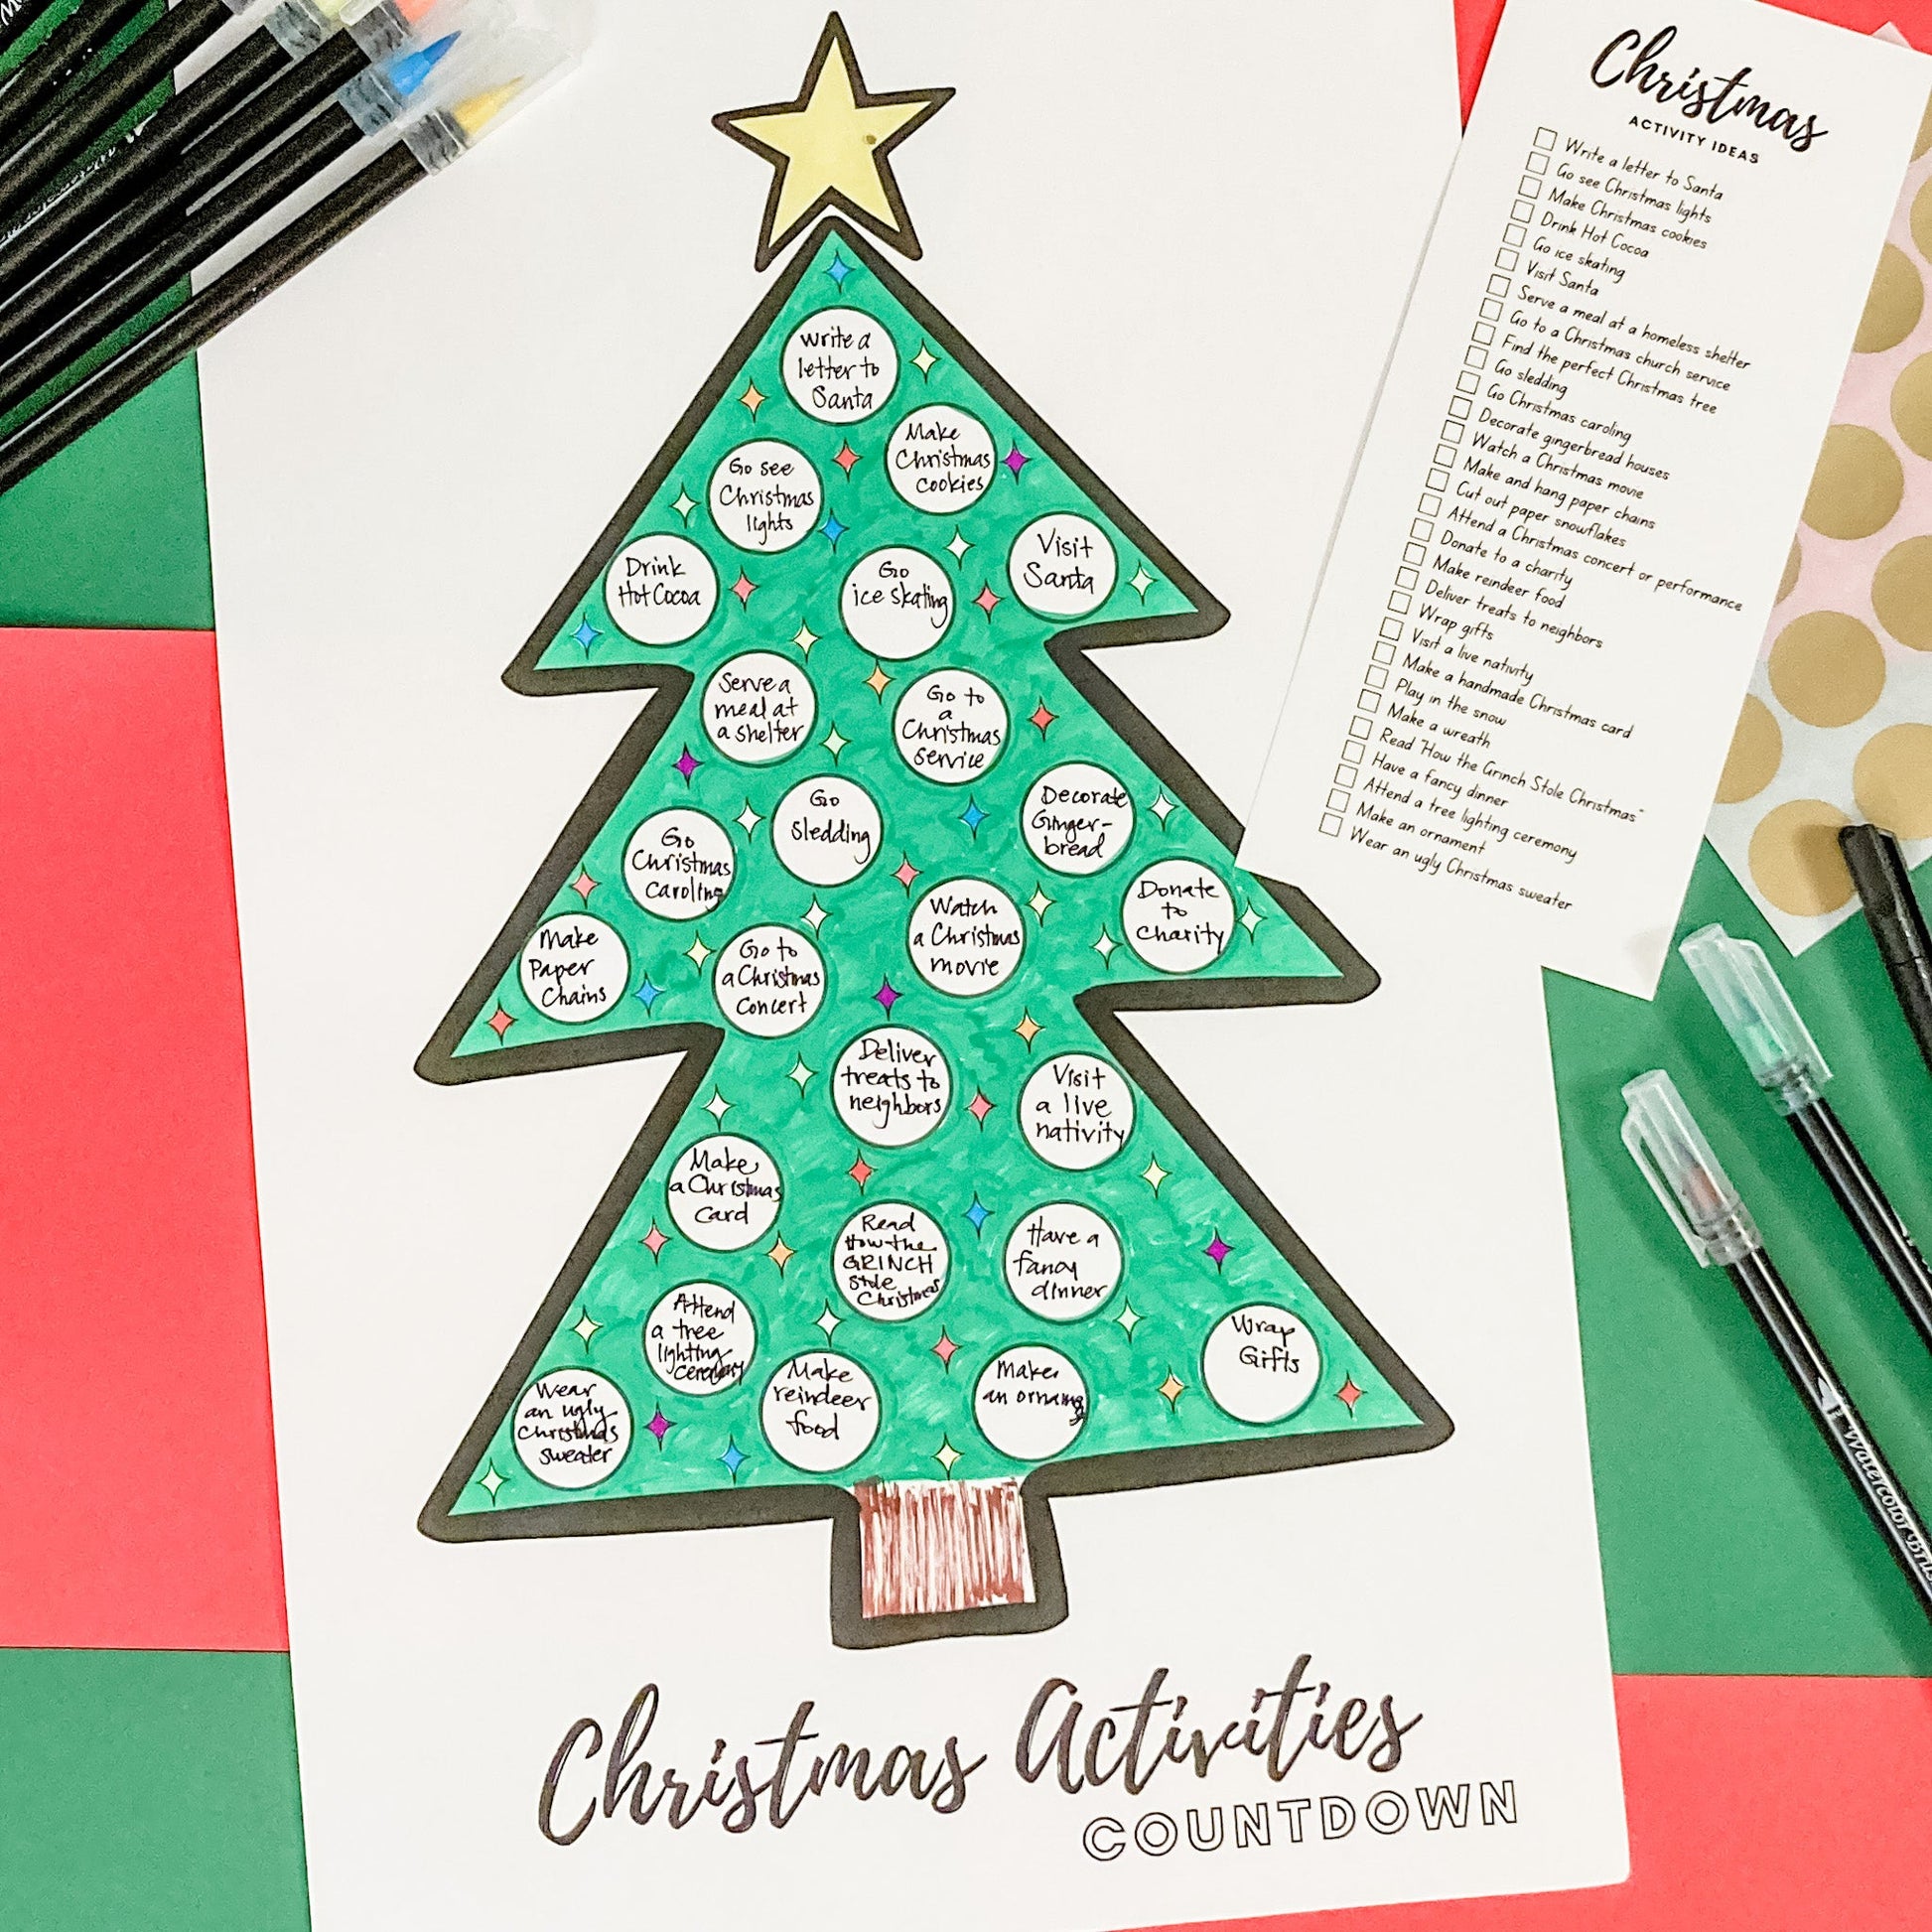 The Advent Scratch-off Christmas tree poster is displayed with activities filled out in the 25 spots.